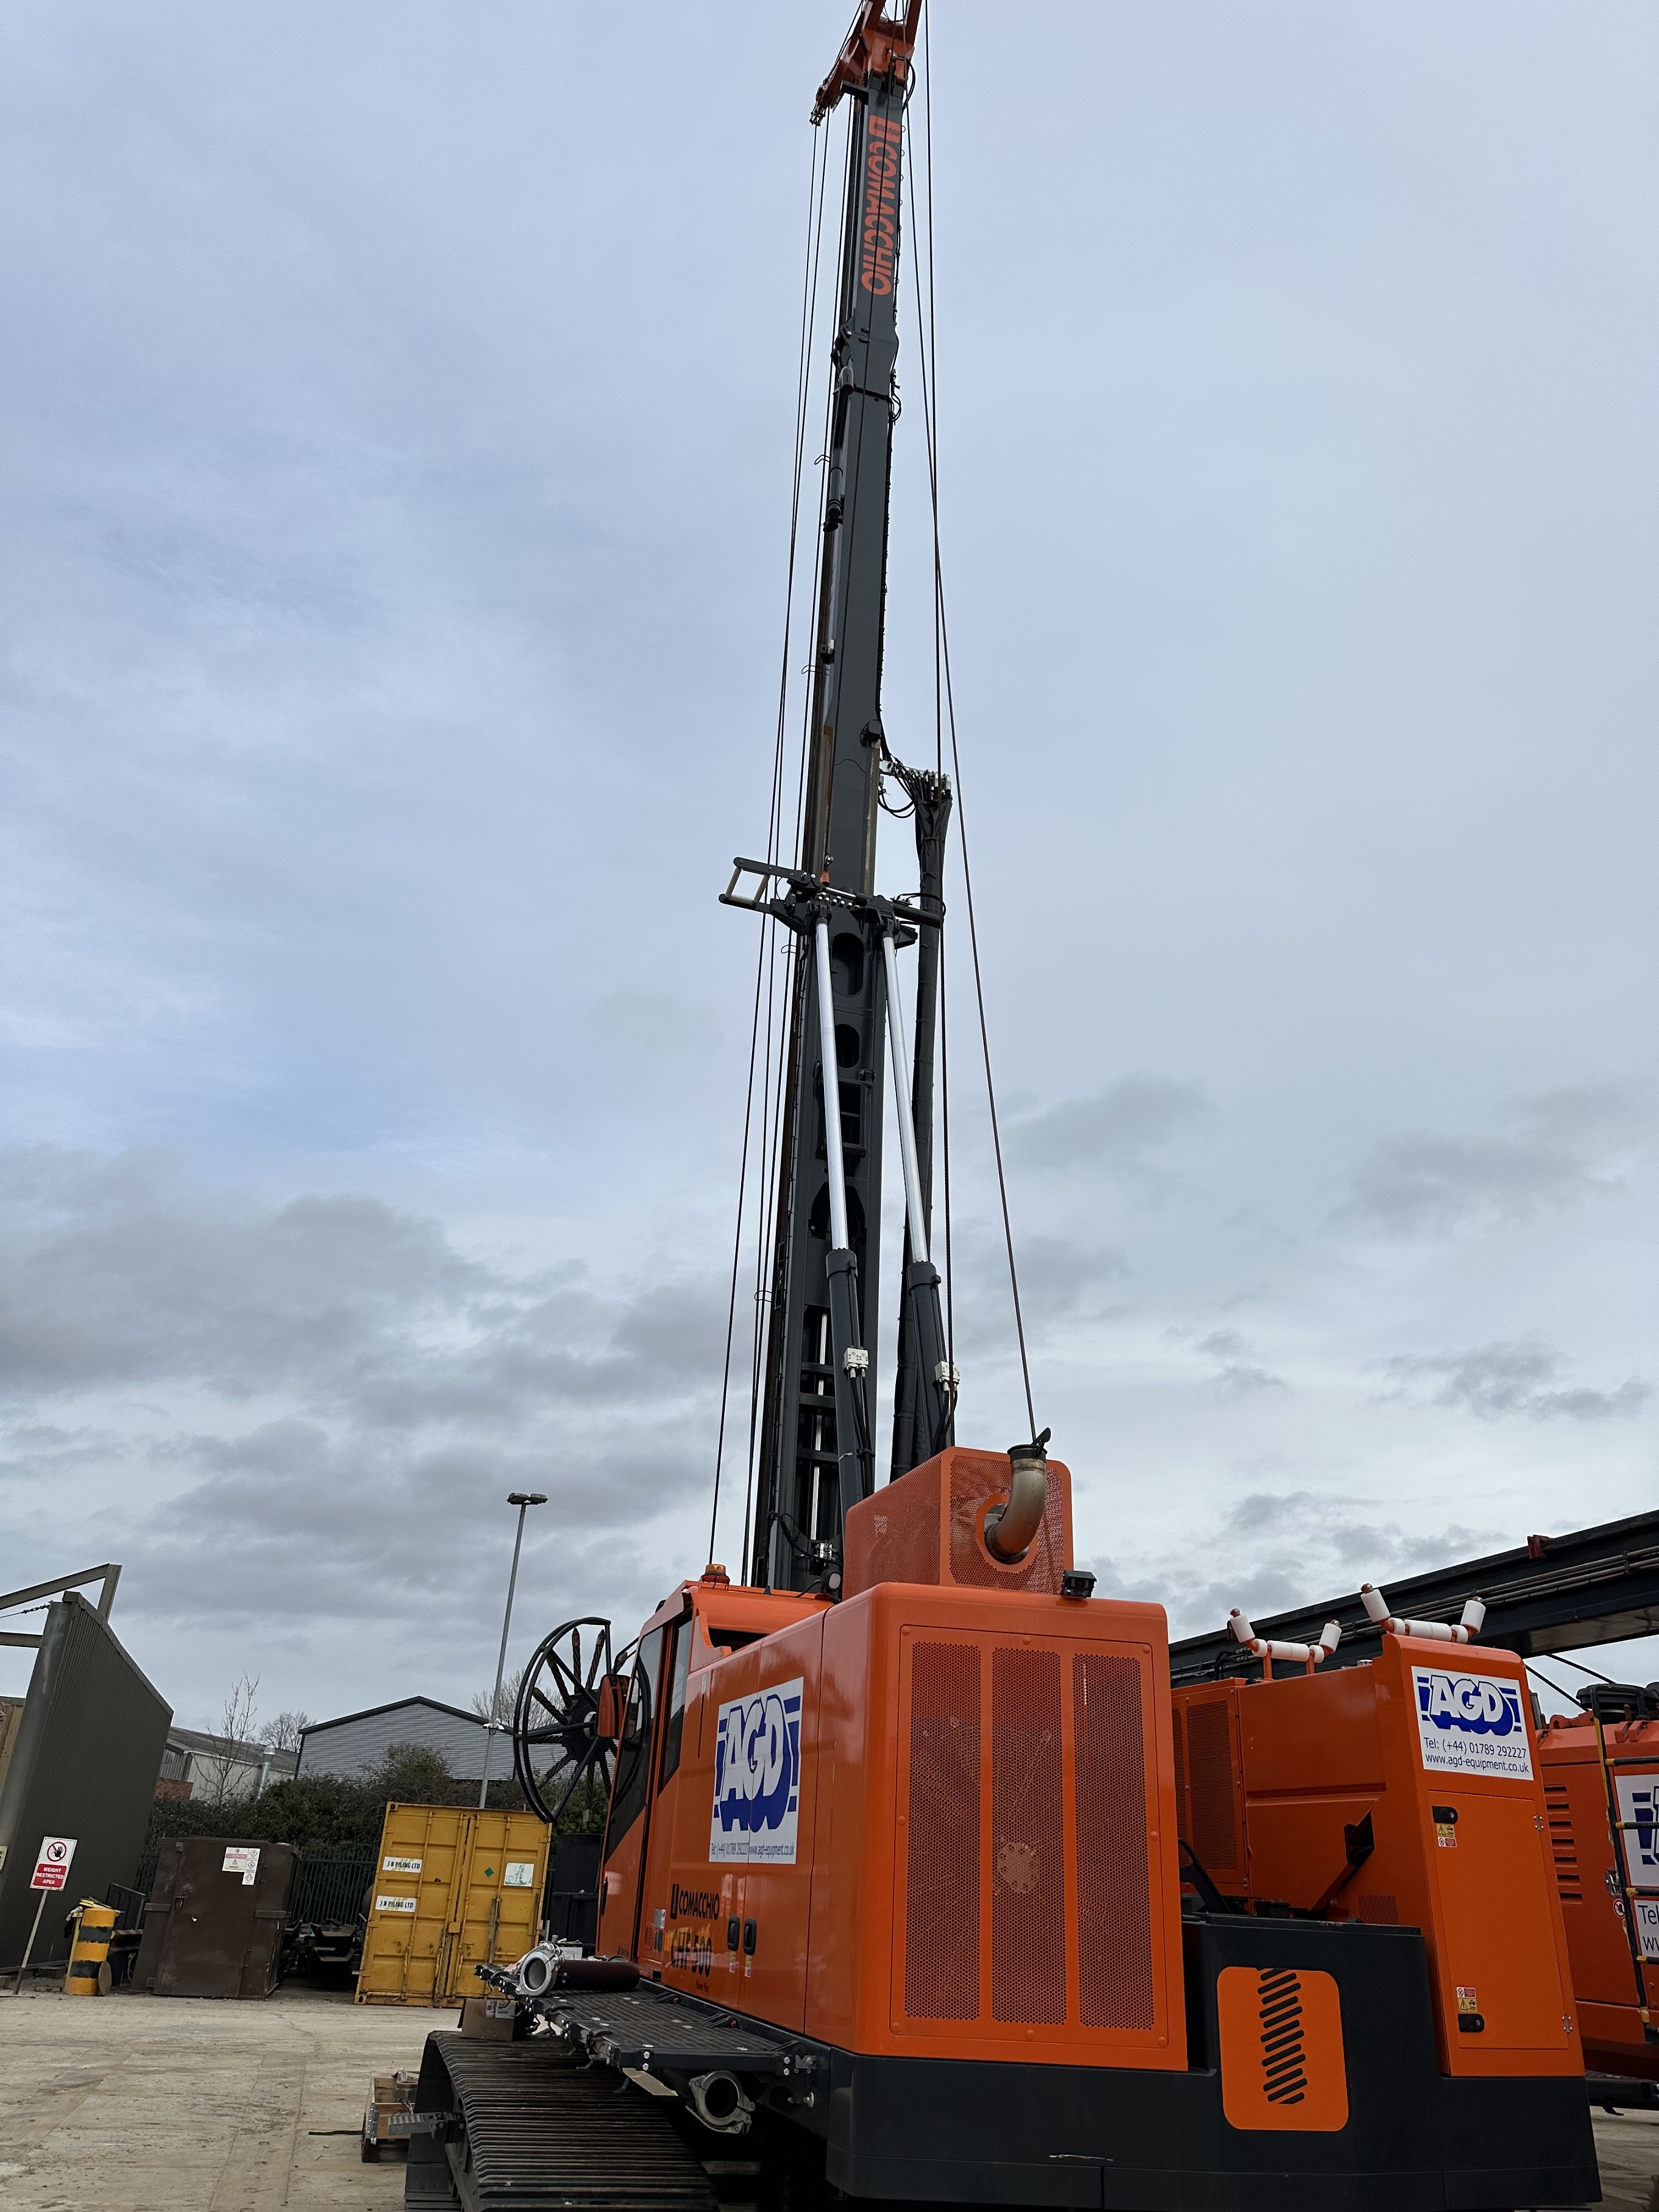 Suppliers of Comacchio CH450 CFA Piling Rig Rental UK